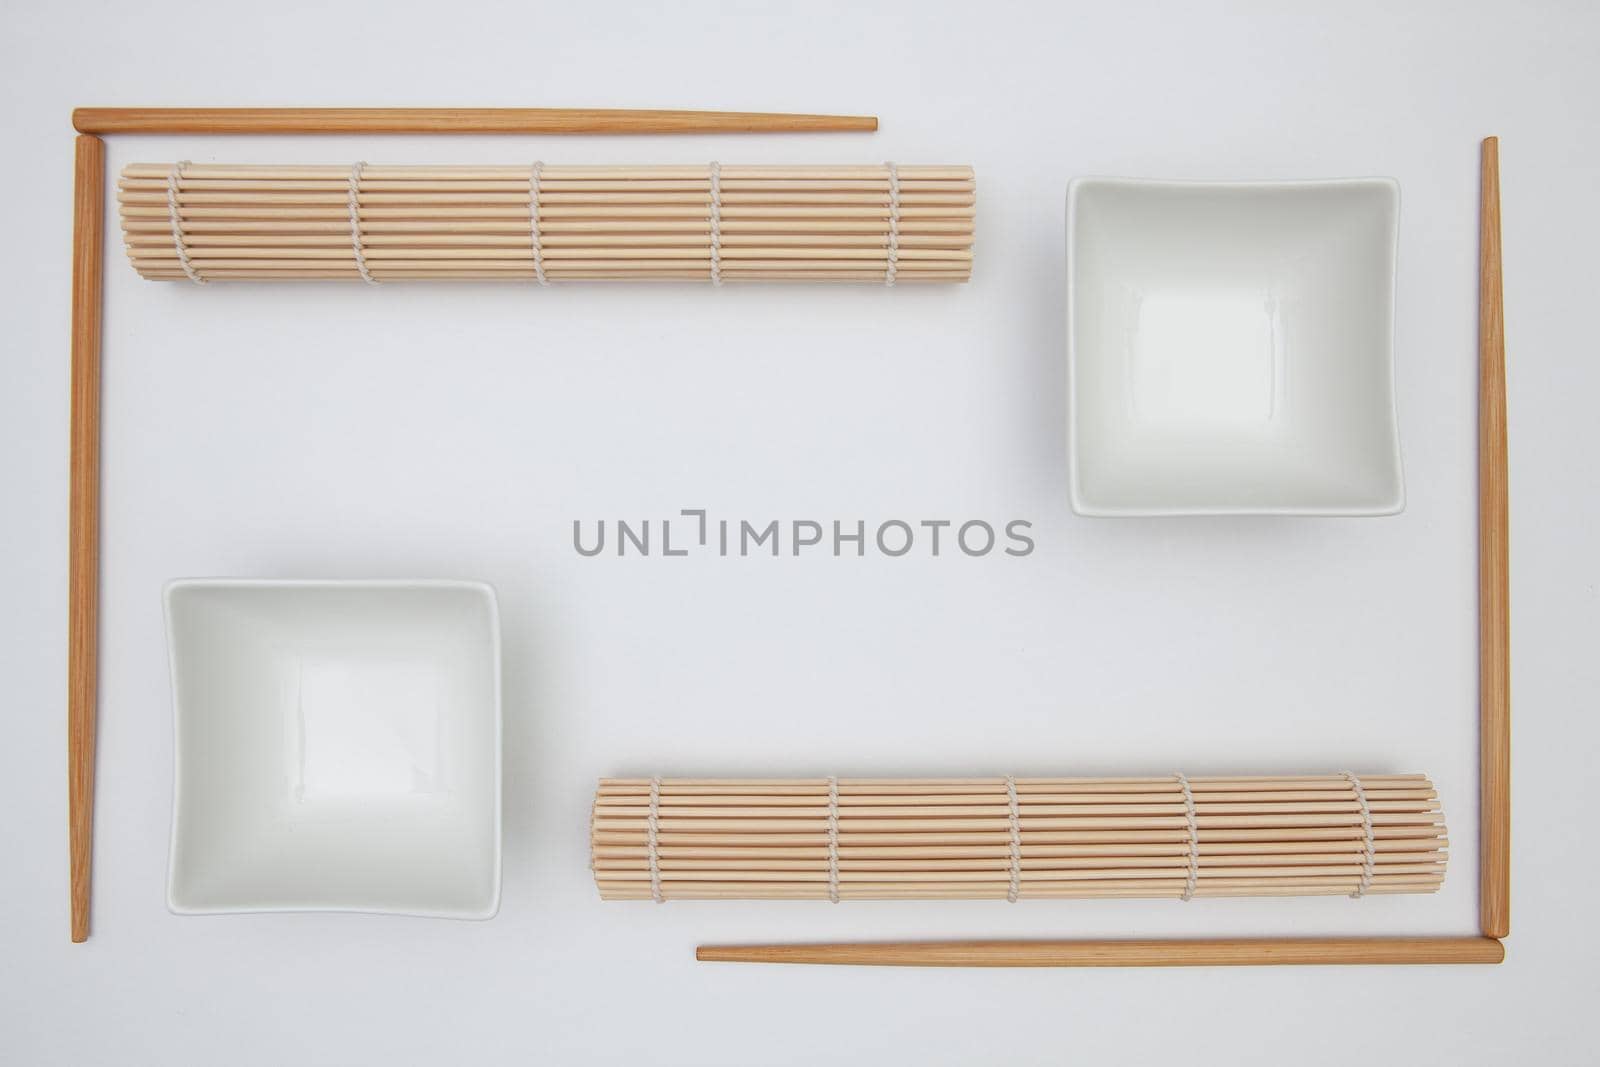 Top View Of White Empty Sushi Plates With Bamboo Chopsticks and Mats. Symmetry Food Design